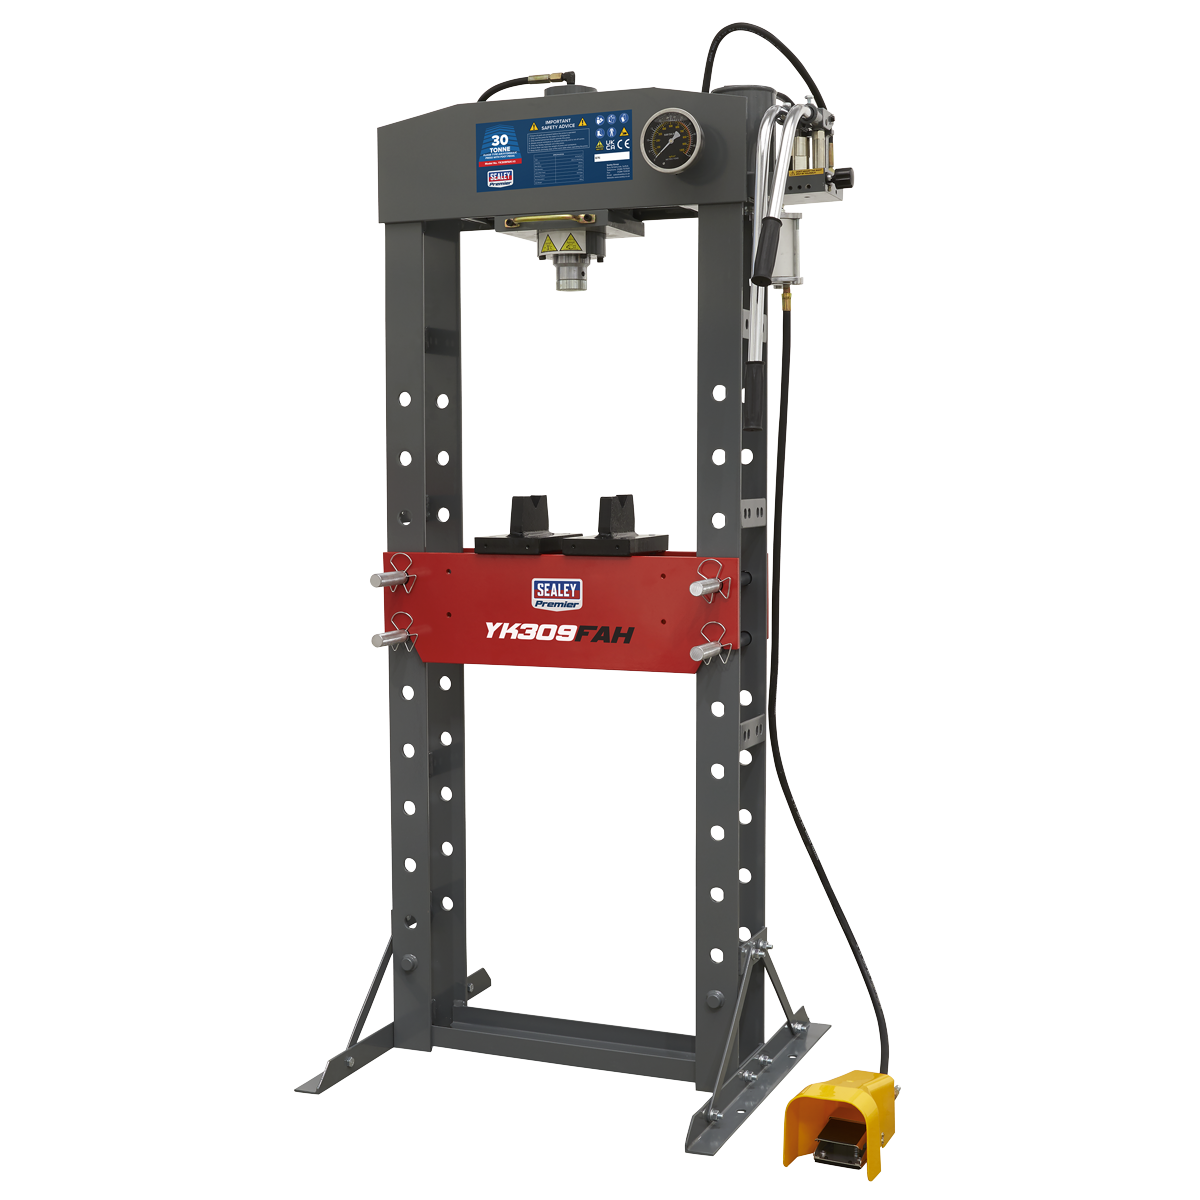 Sealey Air/Hydraulic Press 30 Tonne Floor Type with Foot Pedal YK309FAH